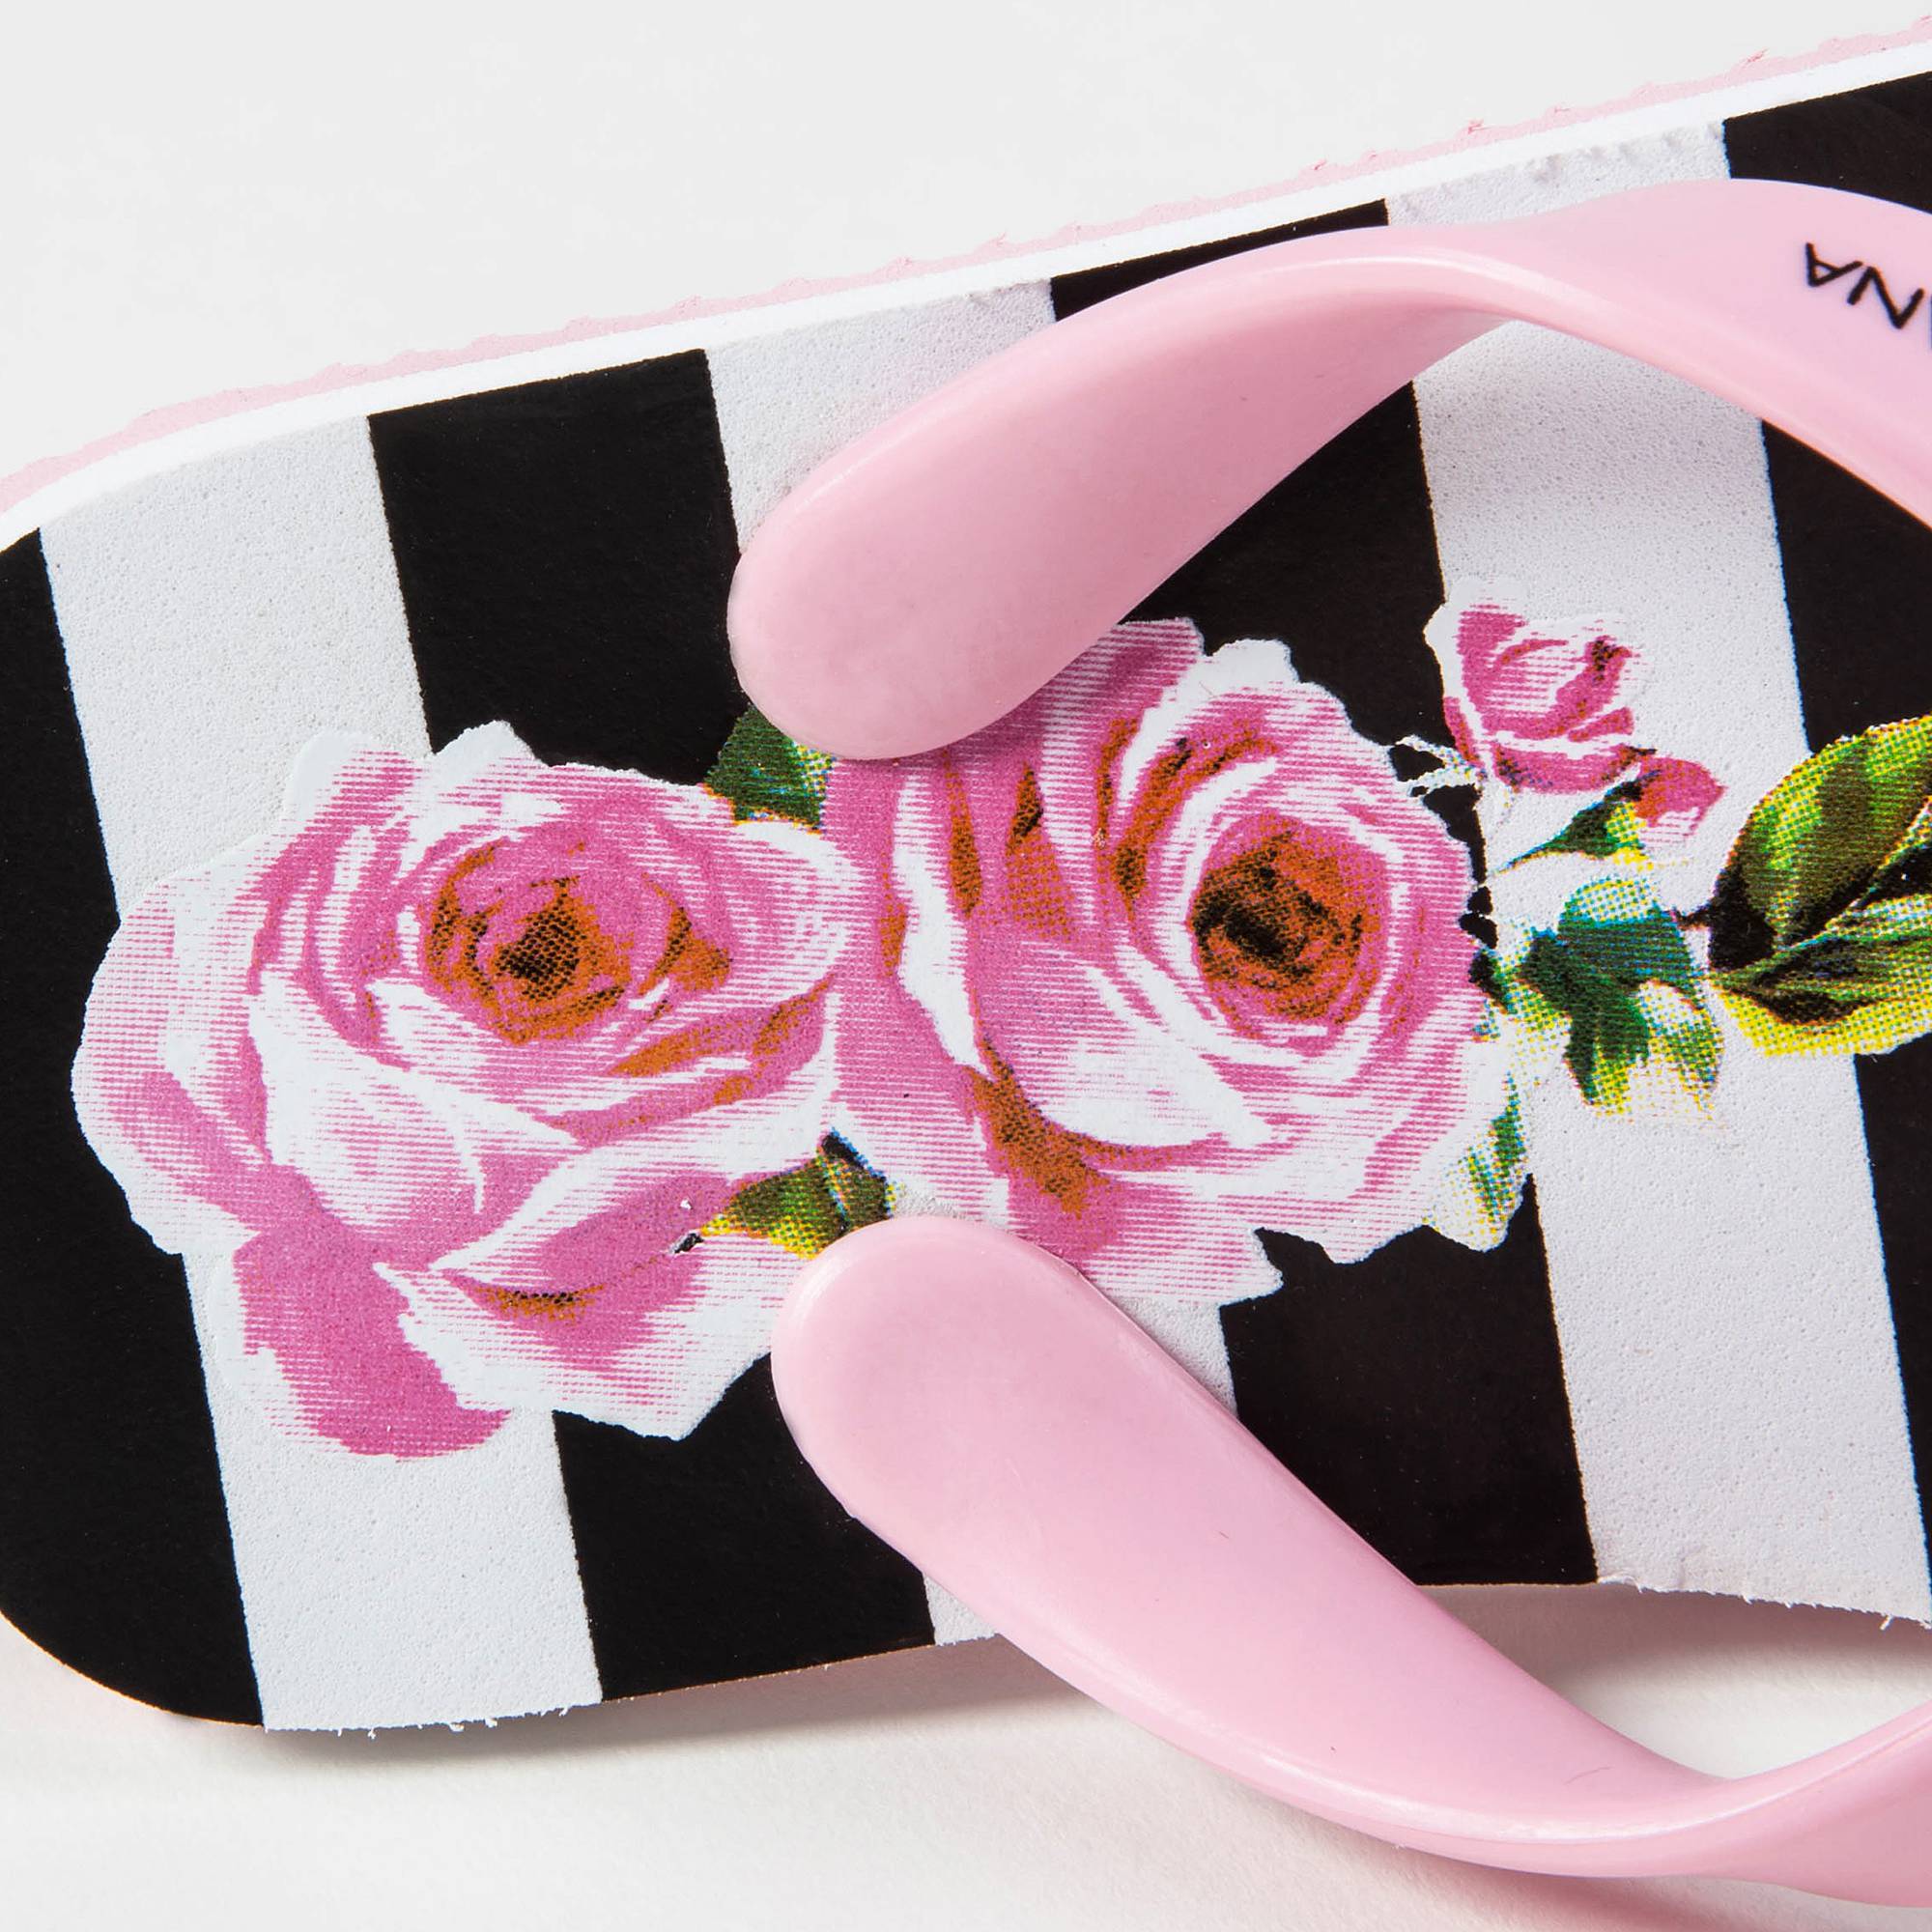 Girls Pink Striped Rose Slippers